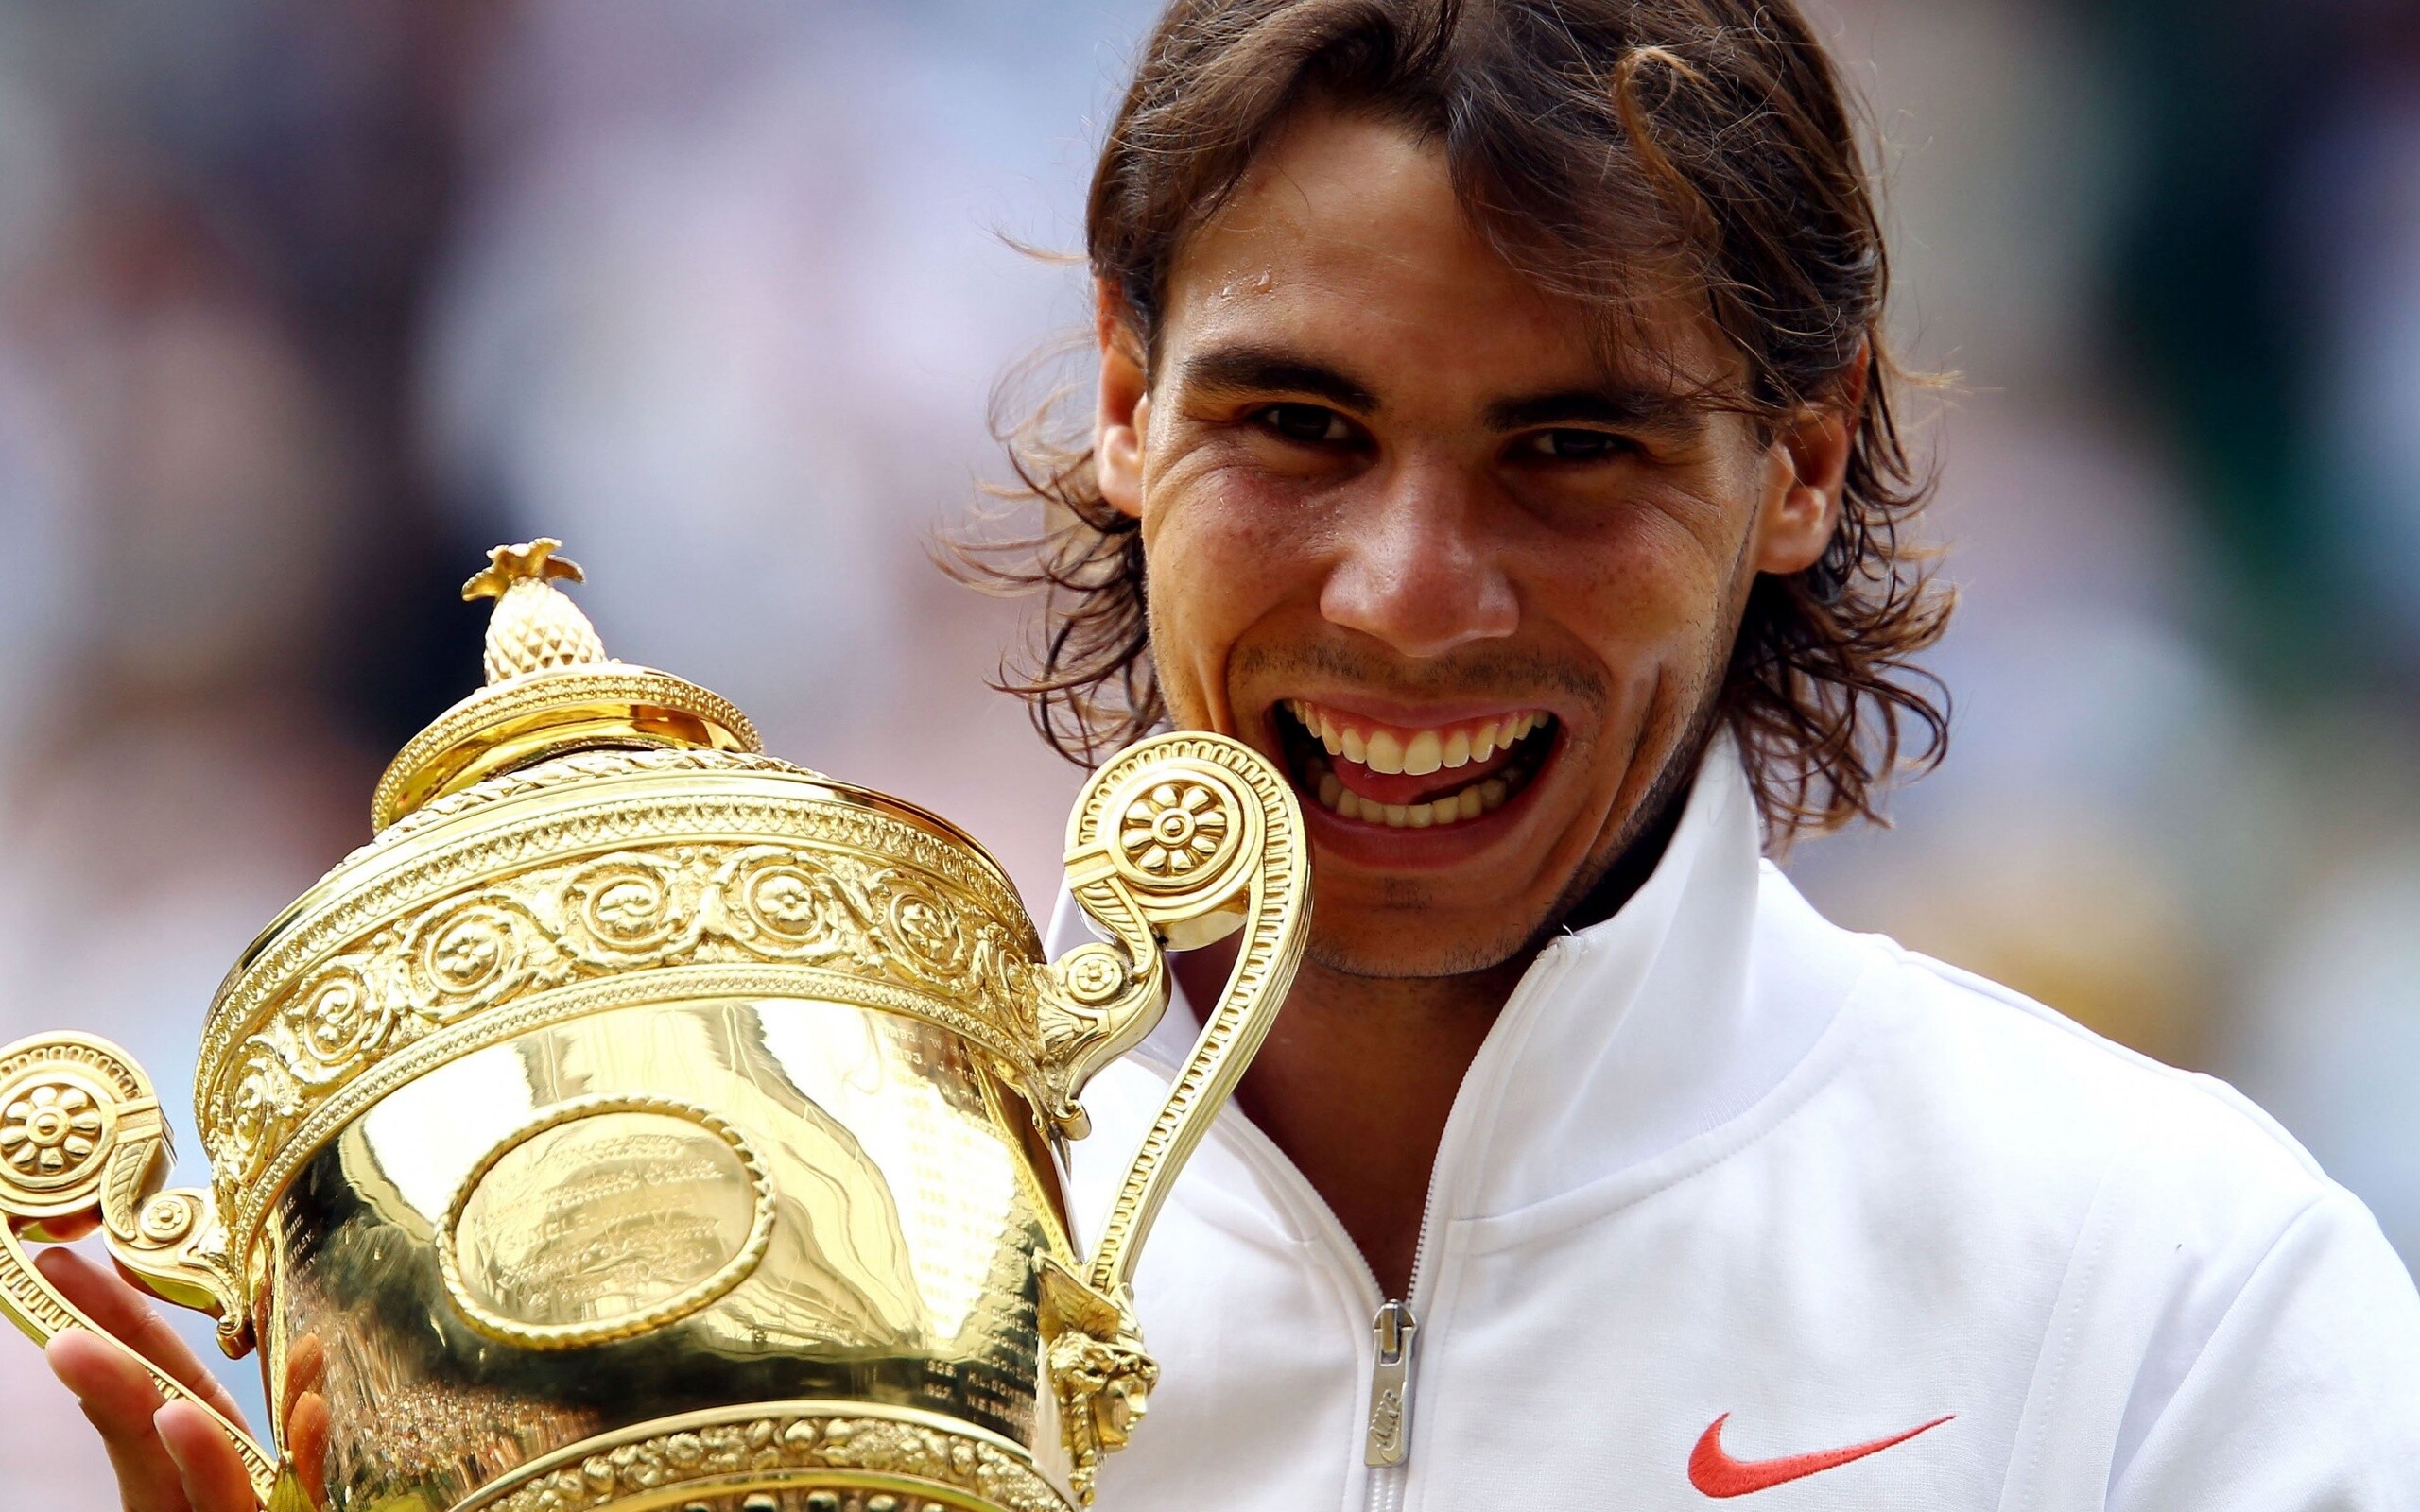 Rafael Nadal: Defeated Tomas Berdych in the final to the 2010 Wimbledon Championships. 2560x1600 HD Background.